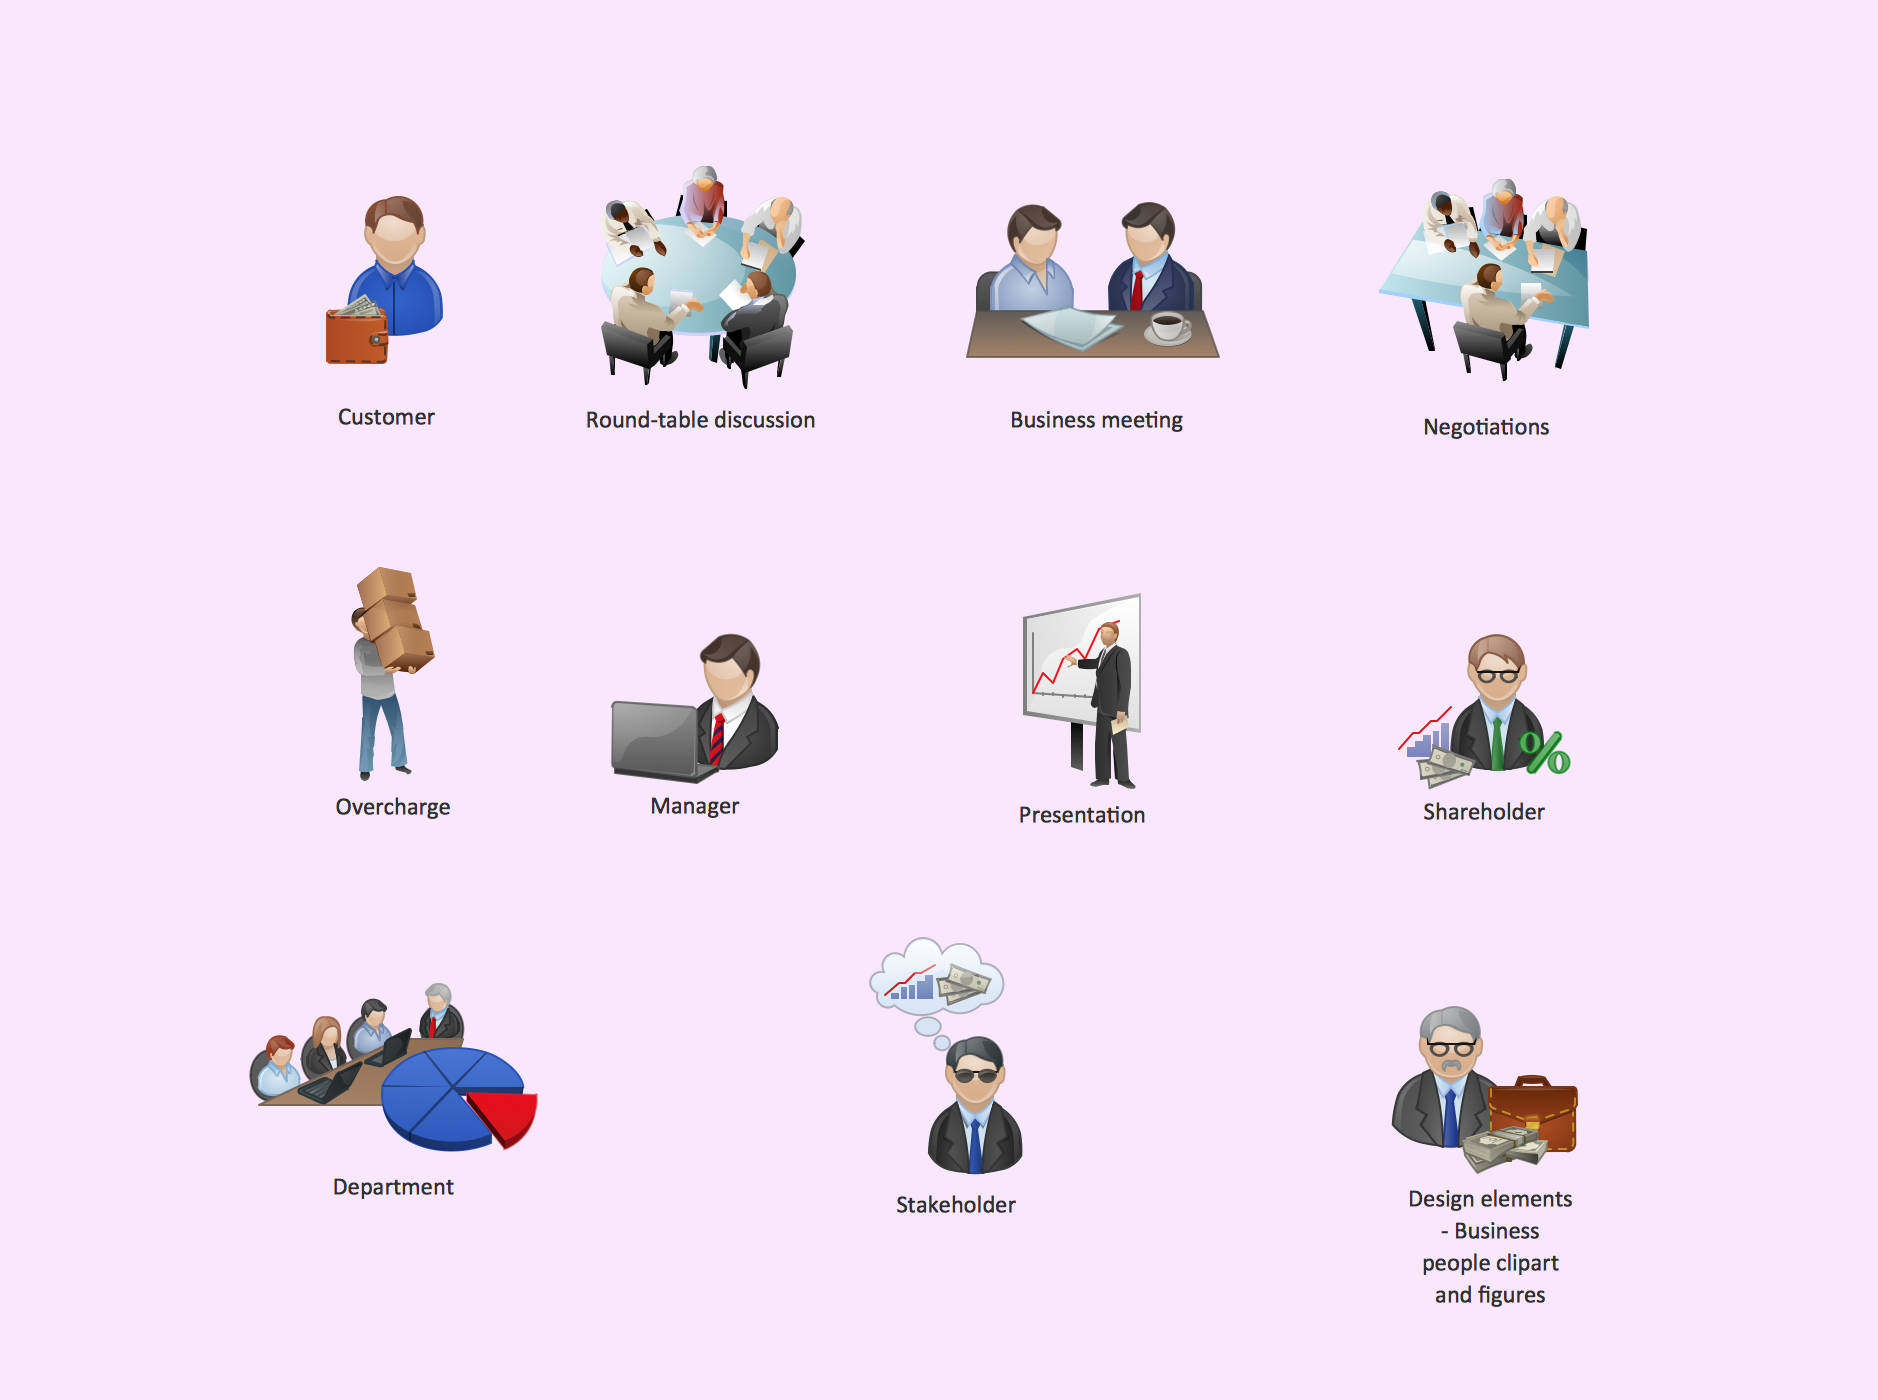 free business clipart downloads - photo #37